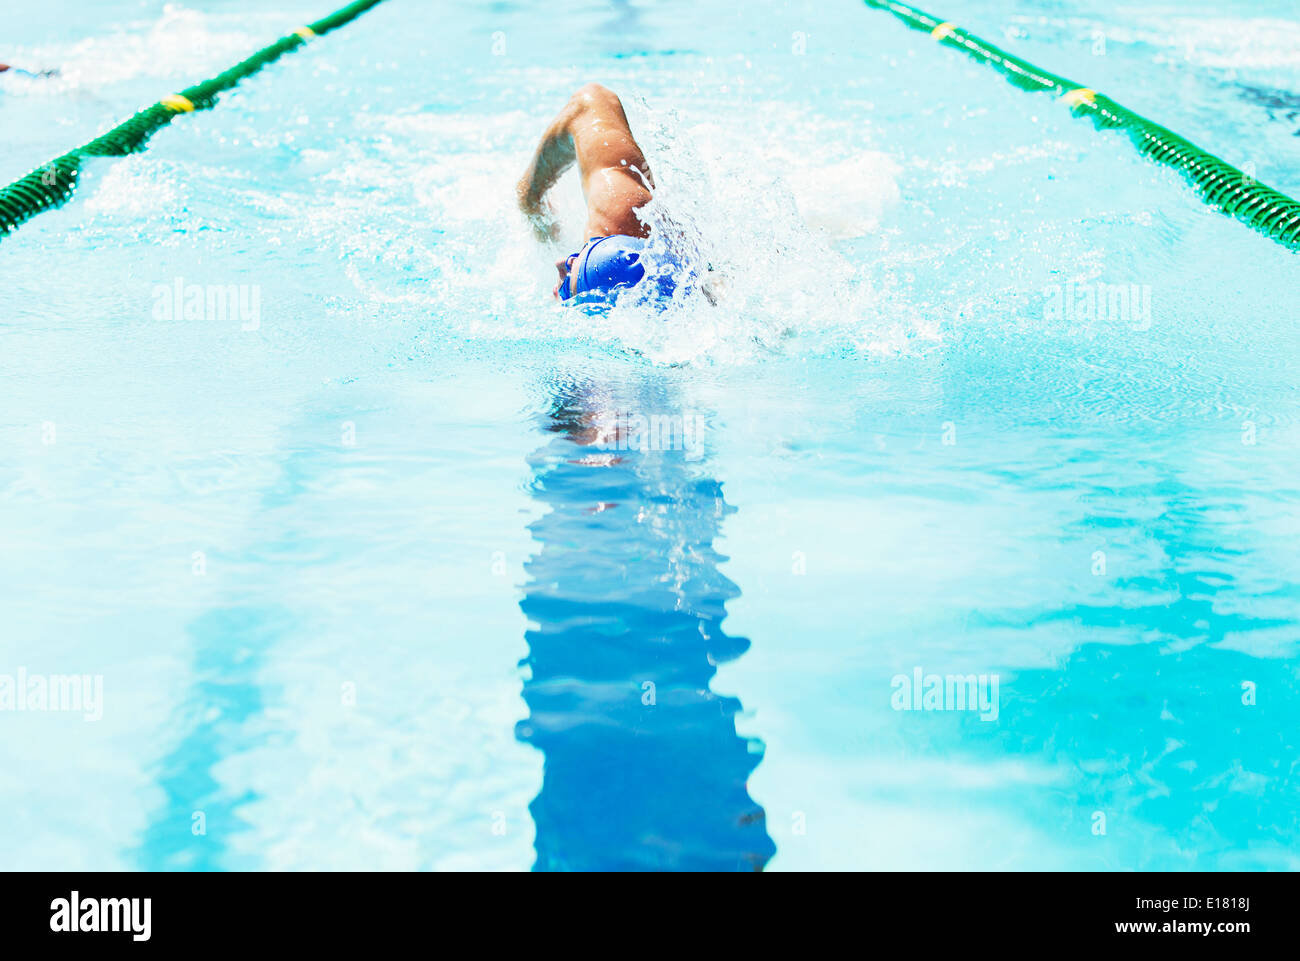 Swimmer racing in pool Banque D'Images